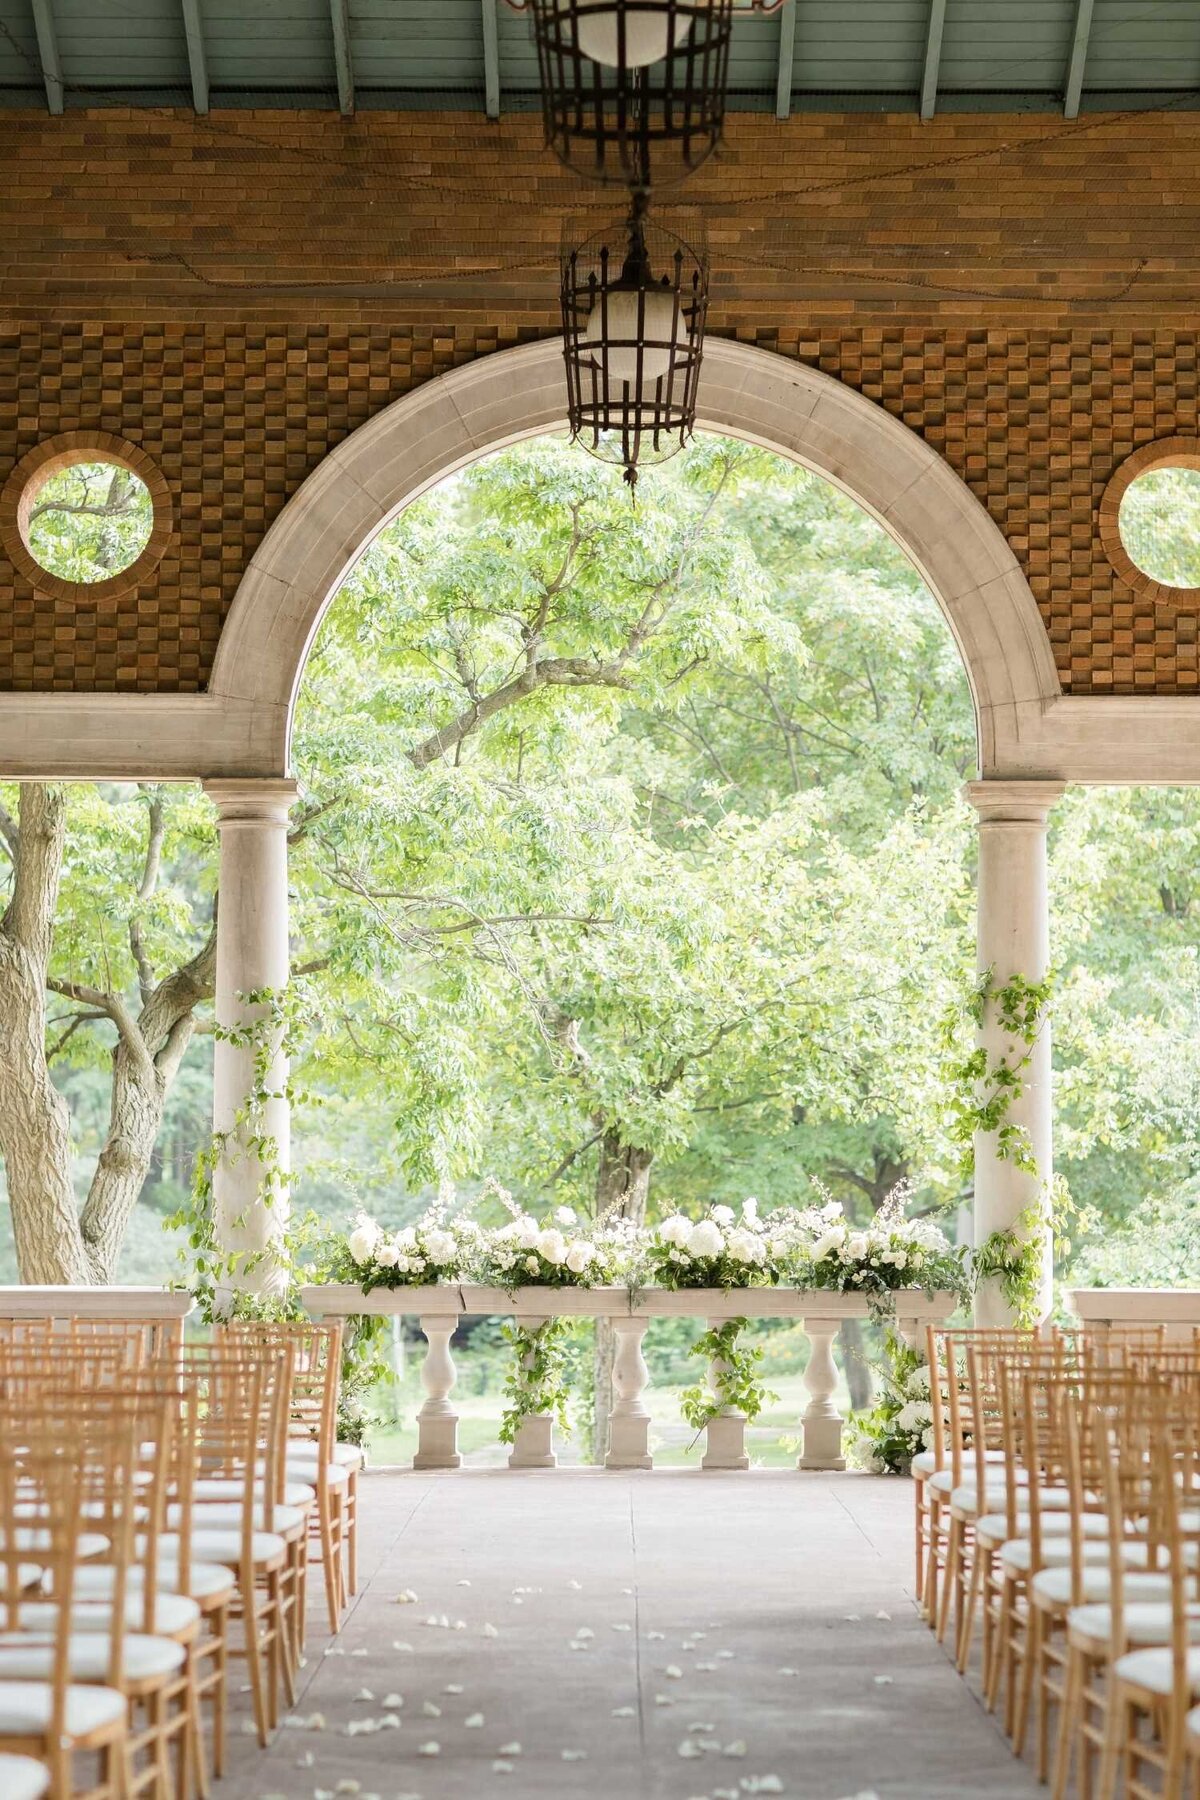 Wedding Ceremony with lush white and green floral at Columbus Park Refectory for a Luxury Chicago Outdoor Historic Wedding Venue.